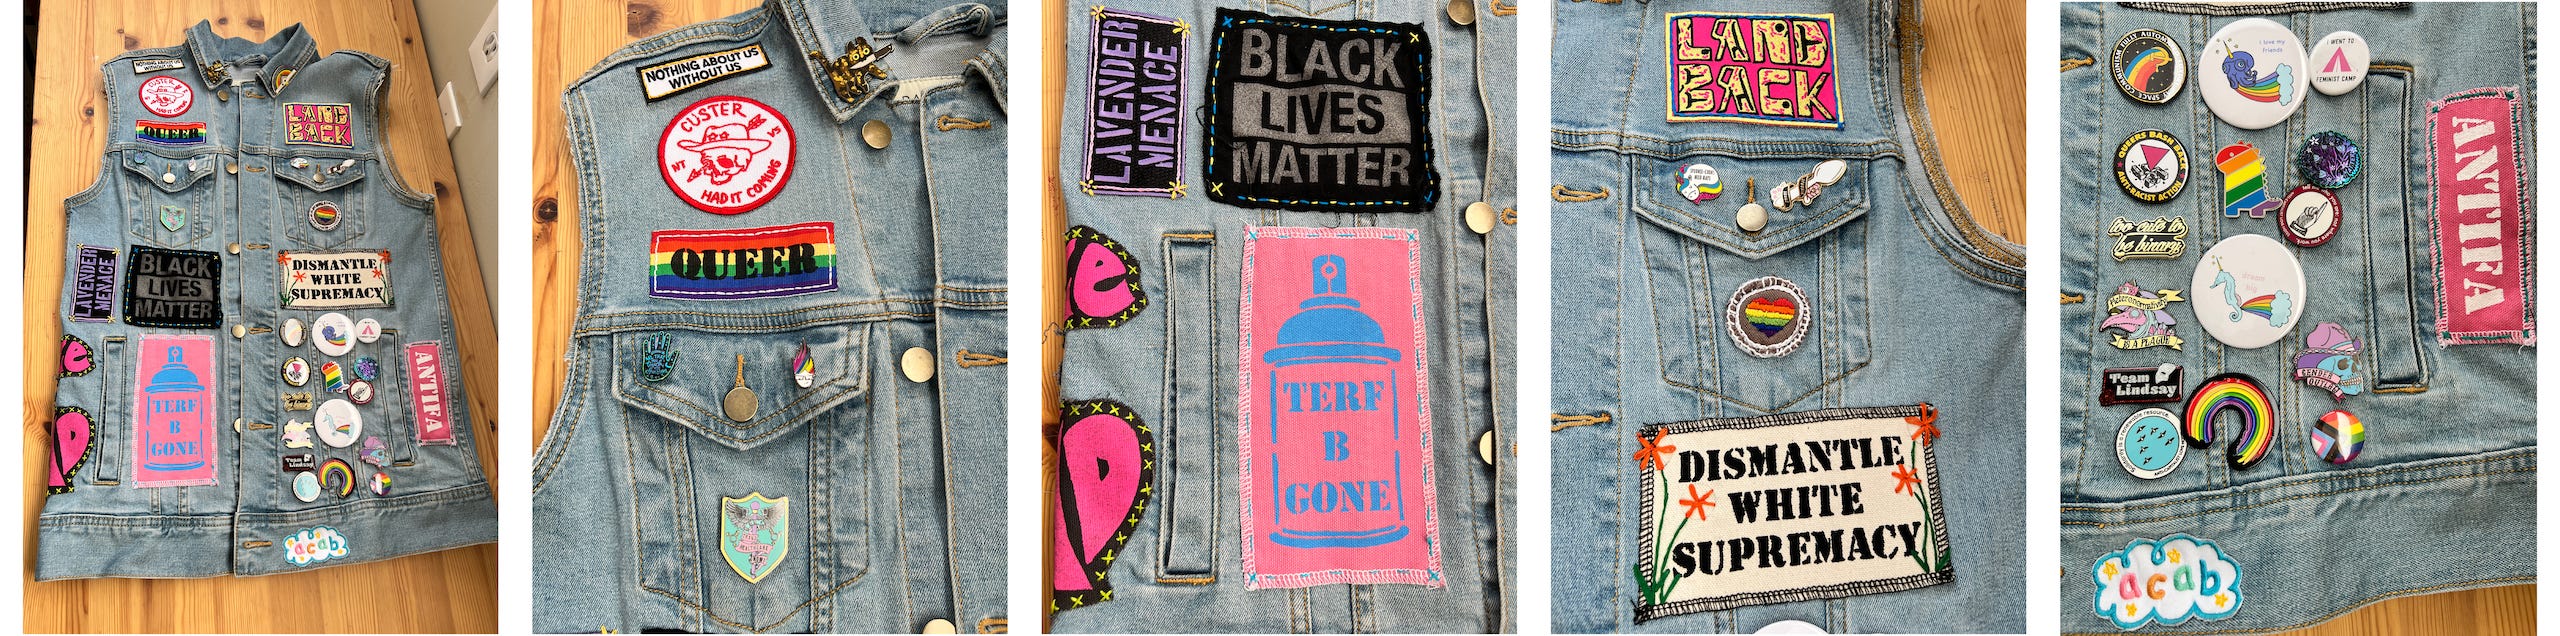 This is a five photo spread of the front of my denim vest. The first photo is a full shot of the whole front of the vest, laid out on a wooden surface. The following four photos are details shots of each section of the front. The first of these captured the patches and pins on the front right upper part of the vest. There is a cute little tortie cat pin on the collar. Three patches are sewn above the pocket on this side. The top one read "Nothing About Us Without Us." The bottom one says QUEER and is printed on a rainbow background. Sandwiched between these two is a circular patch, white with a red design and text. In the middle of the patch is a skull with a hat, an arrow through one eye. In text aroudn this image it says, "Custer Had it Coming". The pocket beneath these has three pins on it. One is of a hand with an Octavia Butler quote, one is a pin with the slogan "Trans Healthcare Now!" and the last is a little person's face. The person is wearing glasses and has spiked up rainbow hair. The next image is of the panel below the pocket. It has three patches on it. 1. A black one with purple text that reads "Lavender Menace". 2. A black patch with silder text that reads "Black Lives Matter". and 3. A bright pink patch with blue text and imagery. The image is of a spray can and the text, as a label on the can, reads "TERF B GONE". The next image is of the left side pocket. Above the pocket in stylized yellow and black text on pink are the words "LandBack." Beneath the pocket is a white patch with black text that reads "Dismantle White Supremacy." Orange flowers have been emboirdered on either side. A little hand embroidered circular heart patch is on the pocket and two pins are on the pocket flap. One pin is of a little unicorn curcled up and says "Spooniecorns need naps." The other is of a spoon wrapped in a ribbon with the text "Spoonie Squad". The final image is the lower panel of the left side of the vest. It is mostly covered in an assortment of pins and buttons of all sorts. To the right of the pins is a pink patch with white text reading "Antifa". Below the pins on the bottom edge of the vest is a little cloud shaped patch that looks like a child's drawing and lettering. It has the letters ACAB on it in pink, orange, green and blue. 